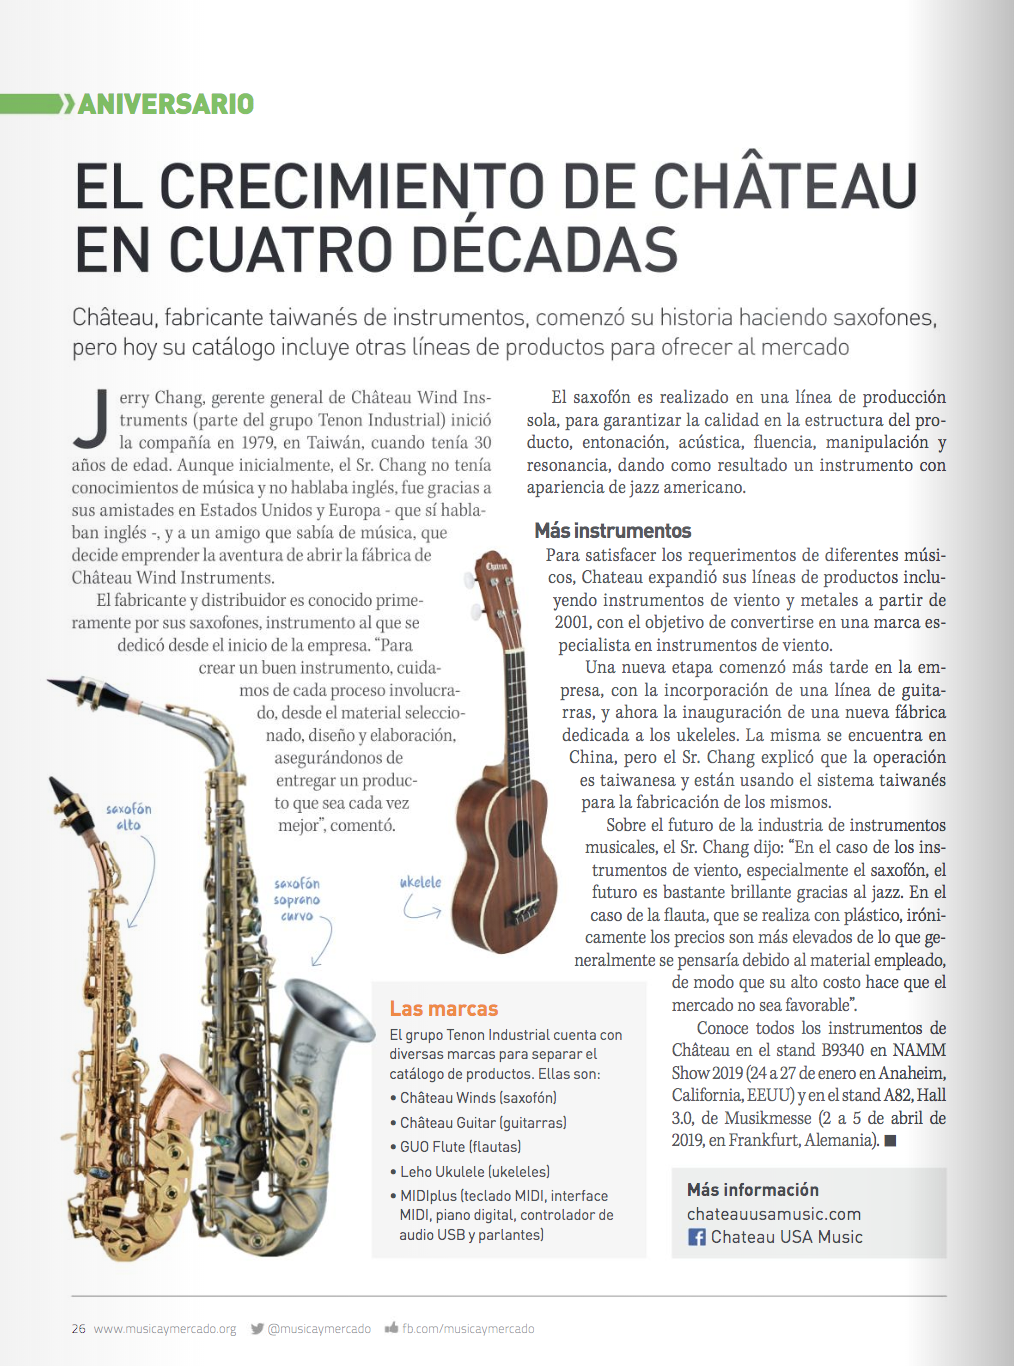 Chateau saxophone - magazine report and introduction